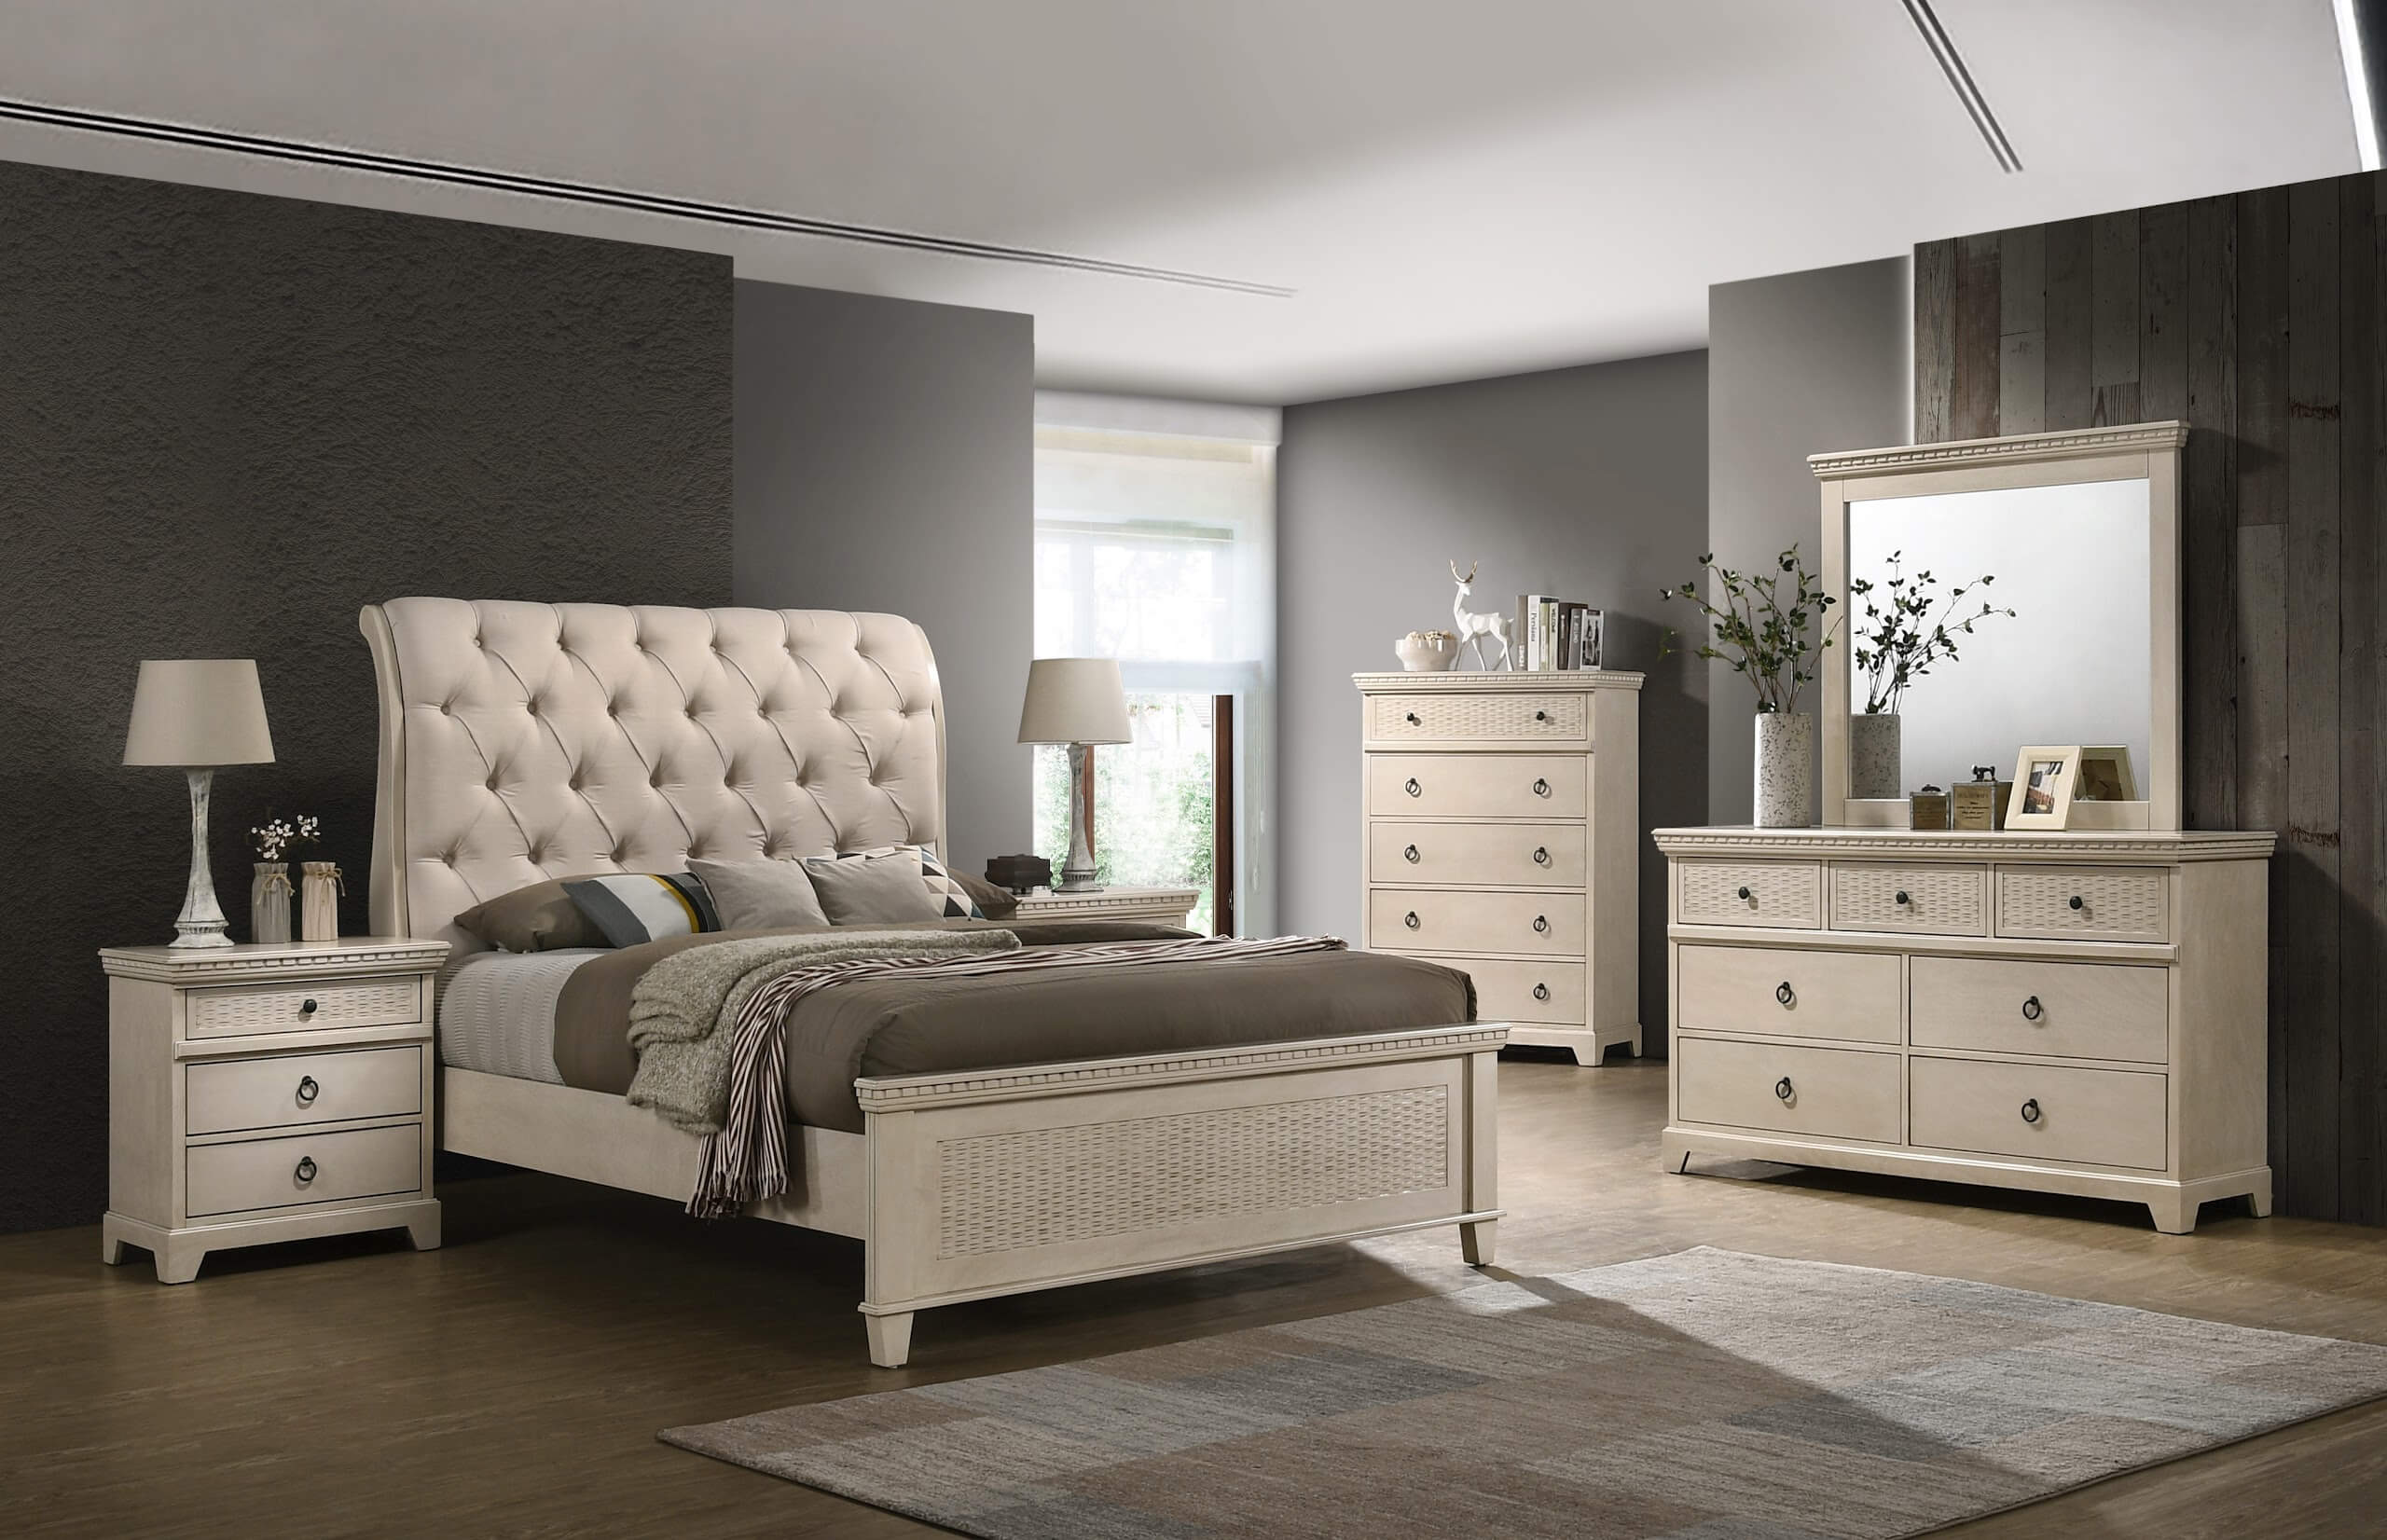 Sausalito Bedroom Suite: Luxury Bedroom Furniture in Old White